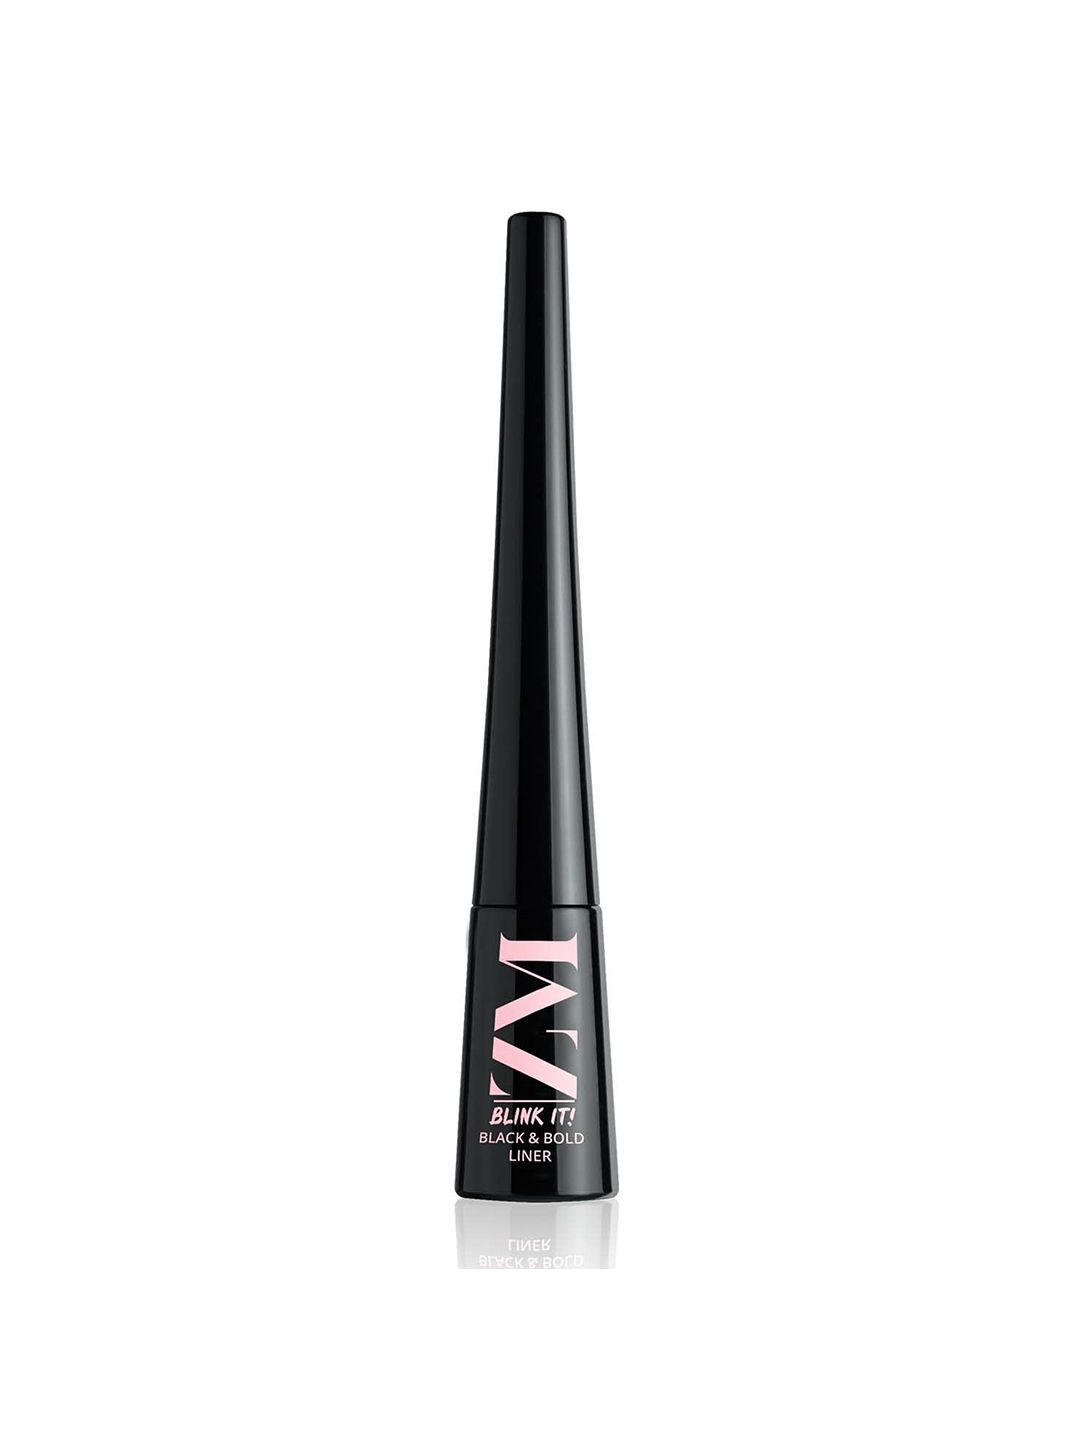 ZM Zayn & Myza Waterproof & Smudge Proof Blink it Liquid Eyeliner 3 ml - Black and Bold Price in India